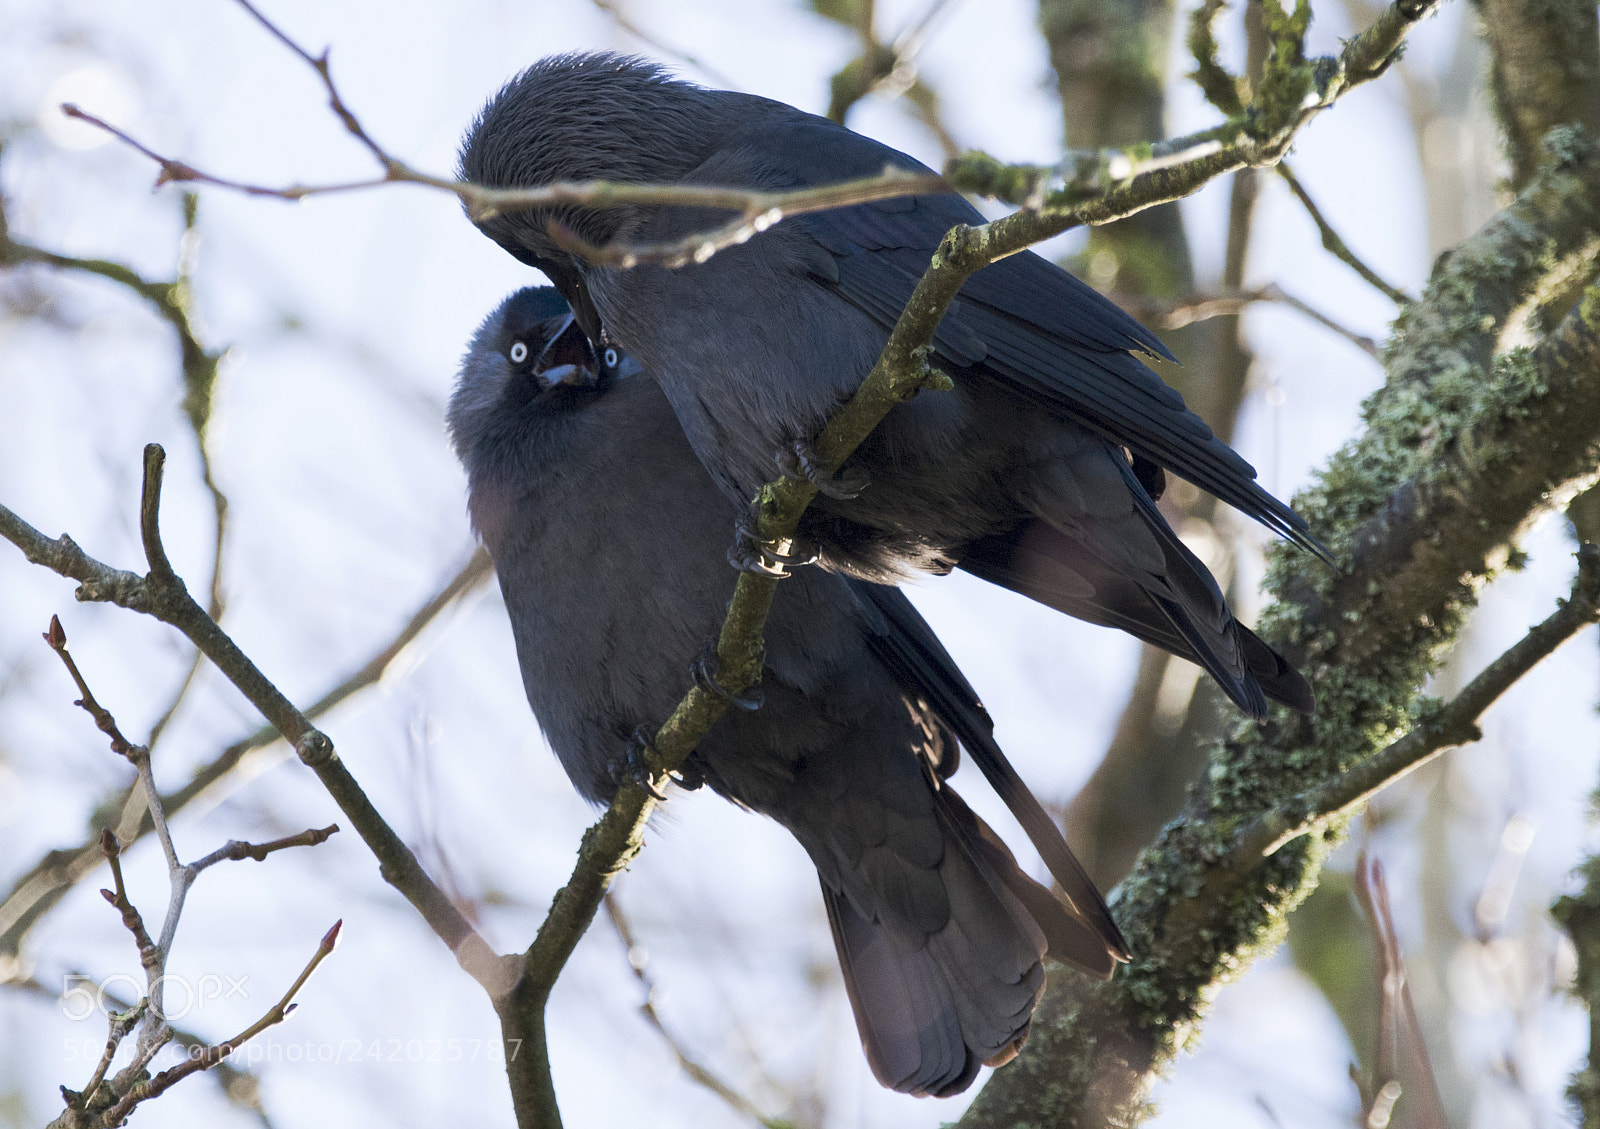 Nikon D800 sample photo. Two birds together photography